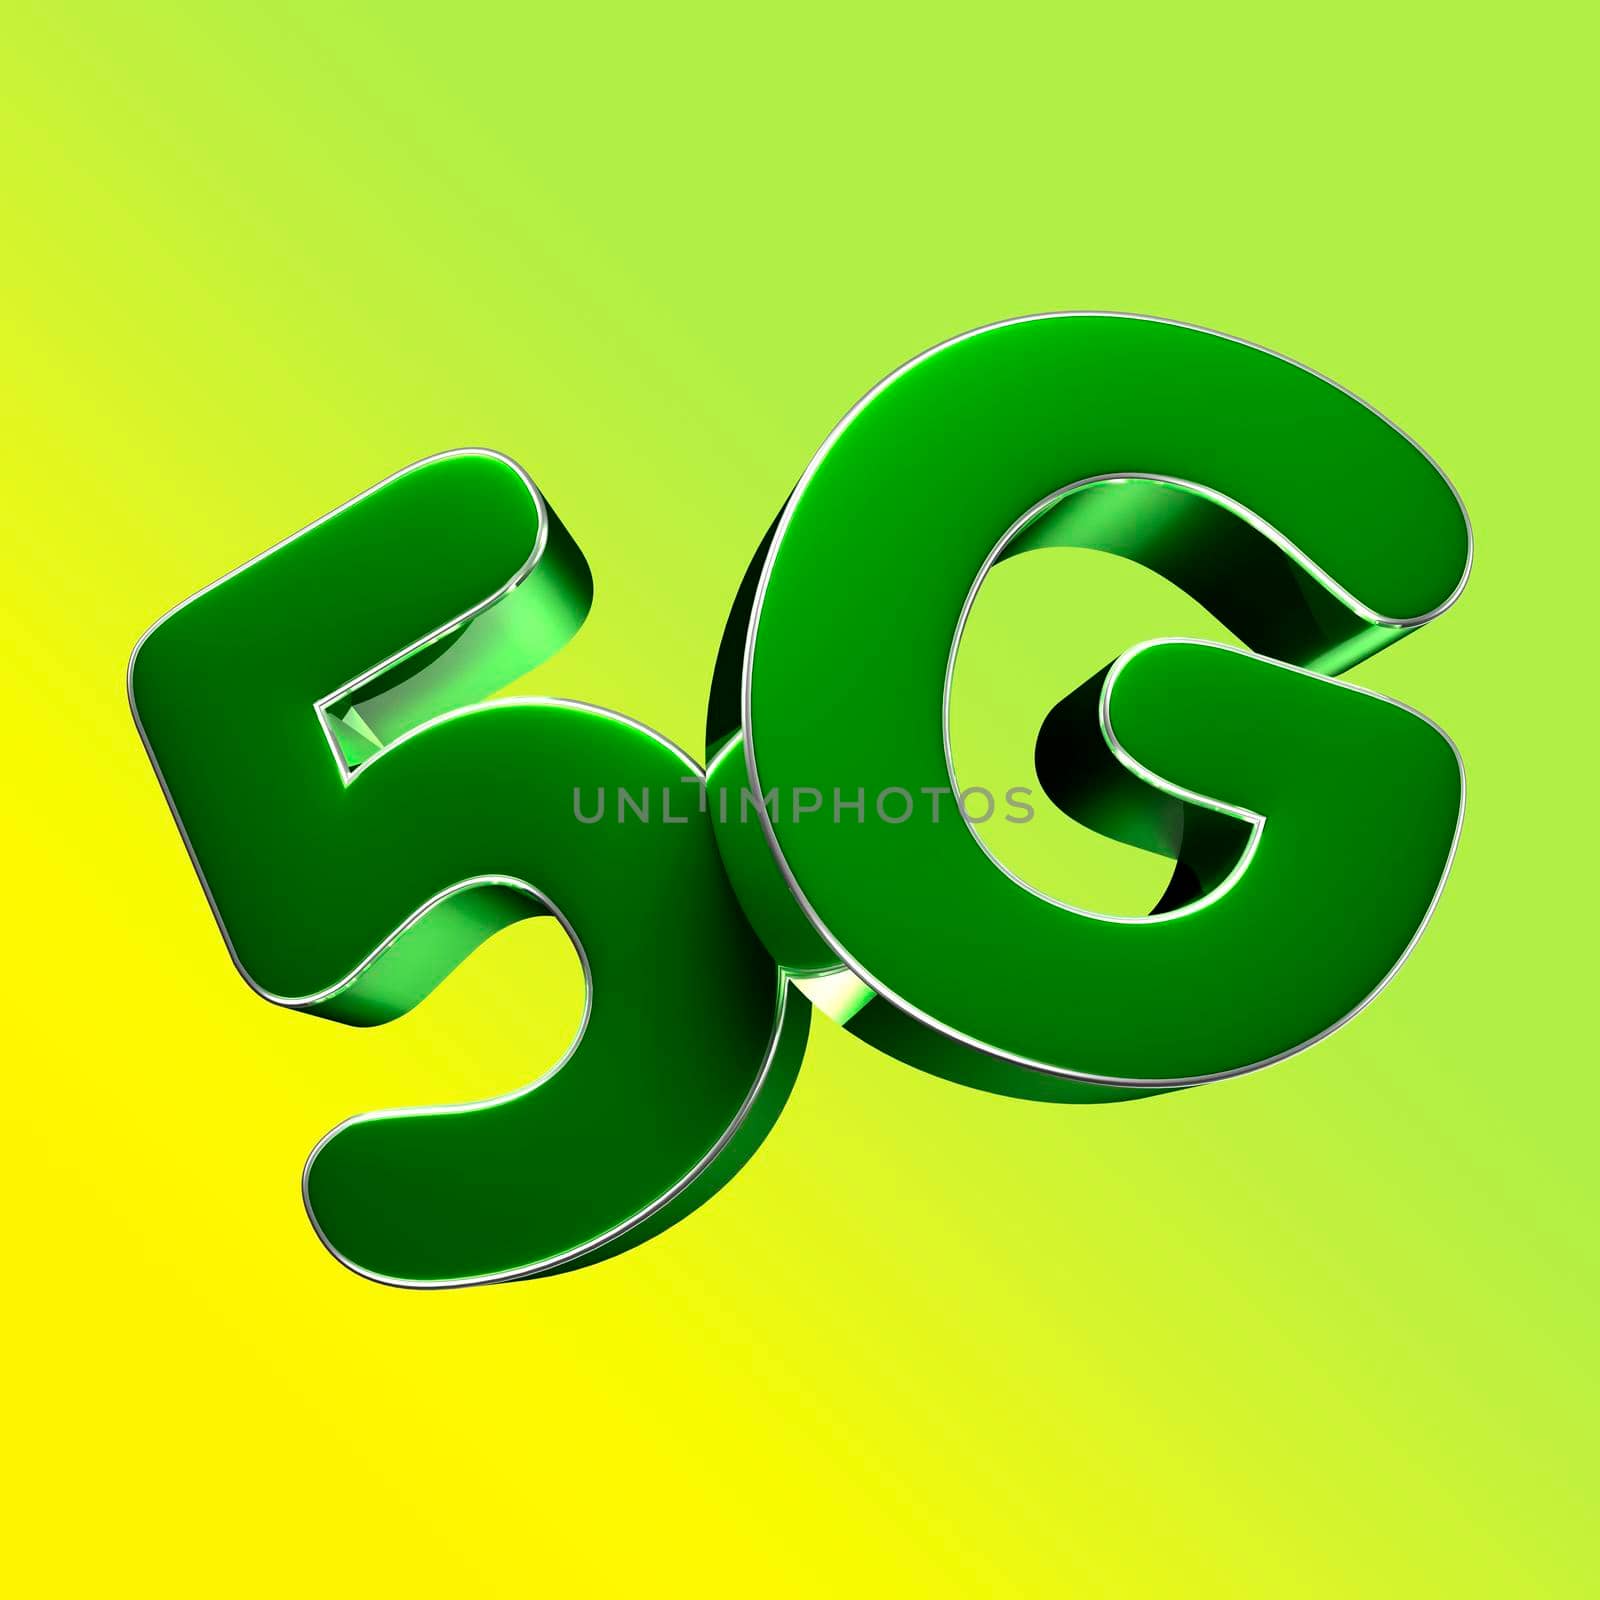 3D illustration 5G green isolated on a yellow green background with clipping path.